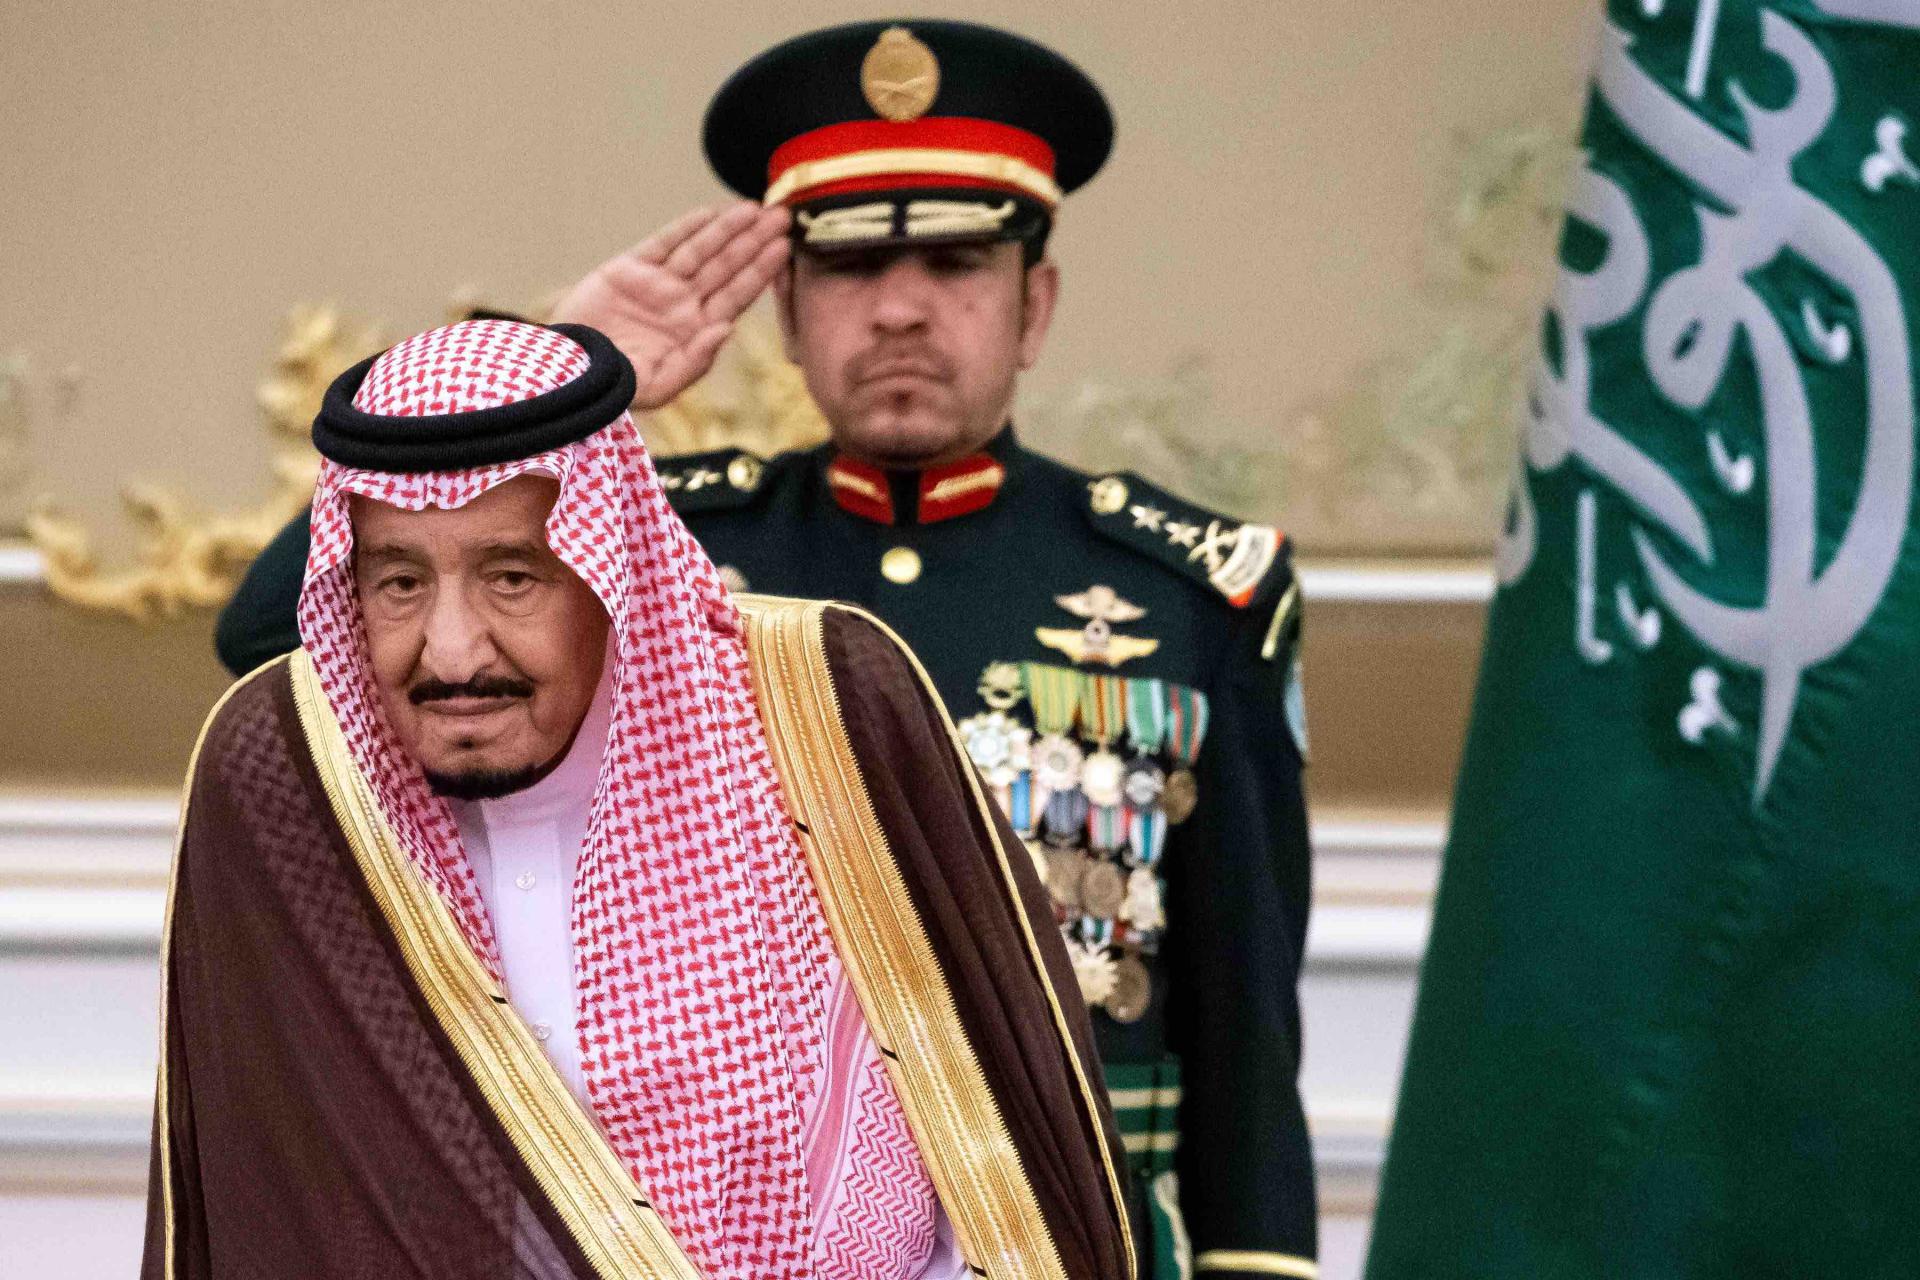 Saudi leaders regularly accuse Iran of stirring conflicts by supporting Shiite movements in the region.